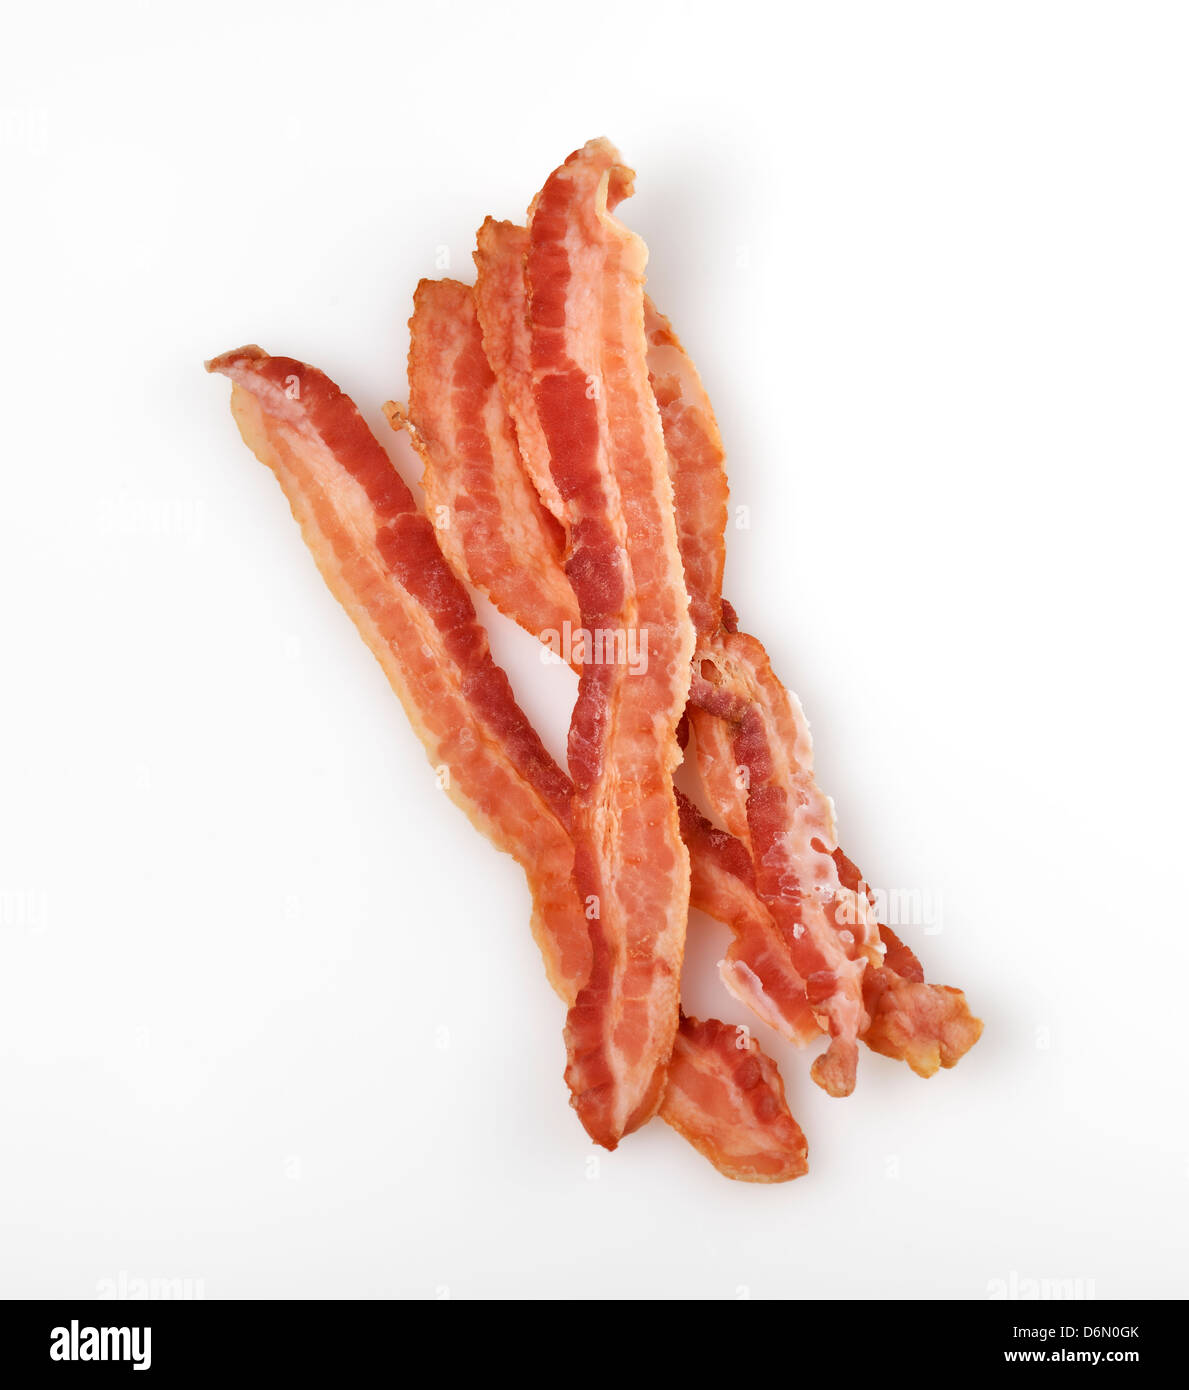 Frying pan with cooked bacon rashers on white background Stock Photo - Alamy